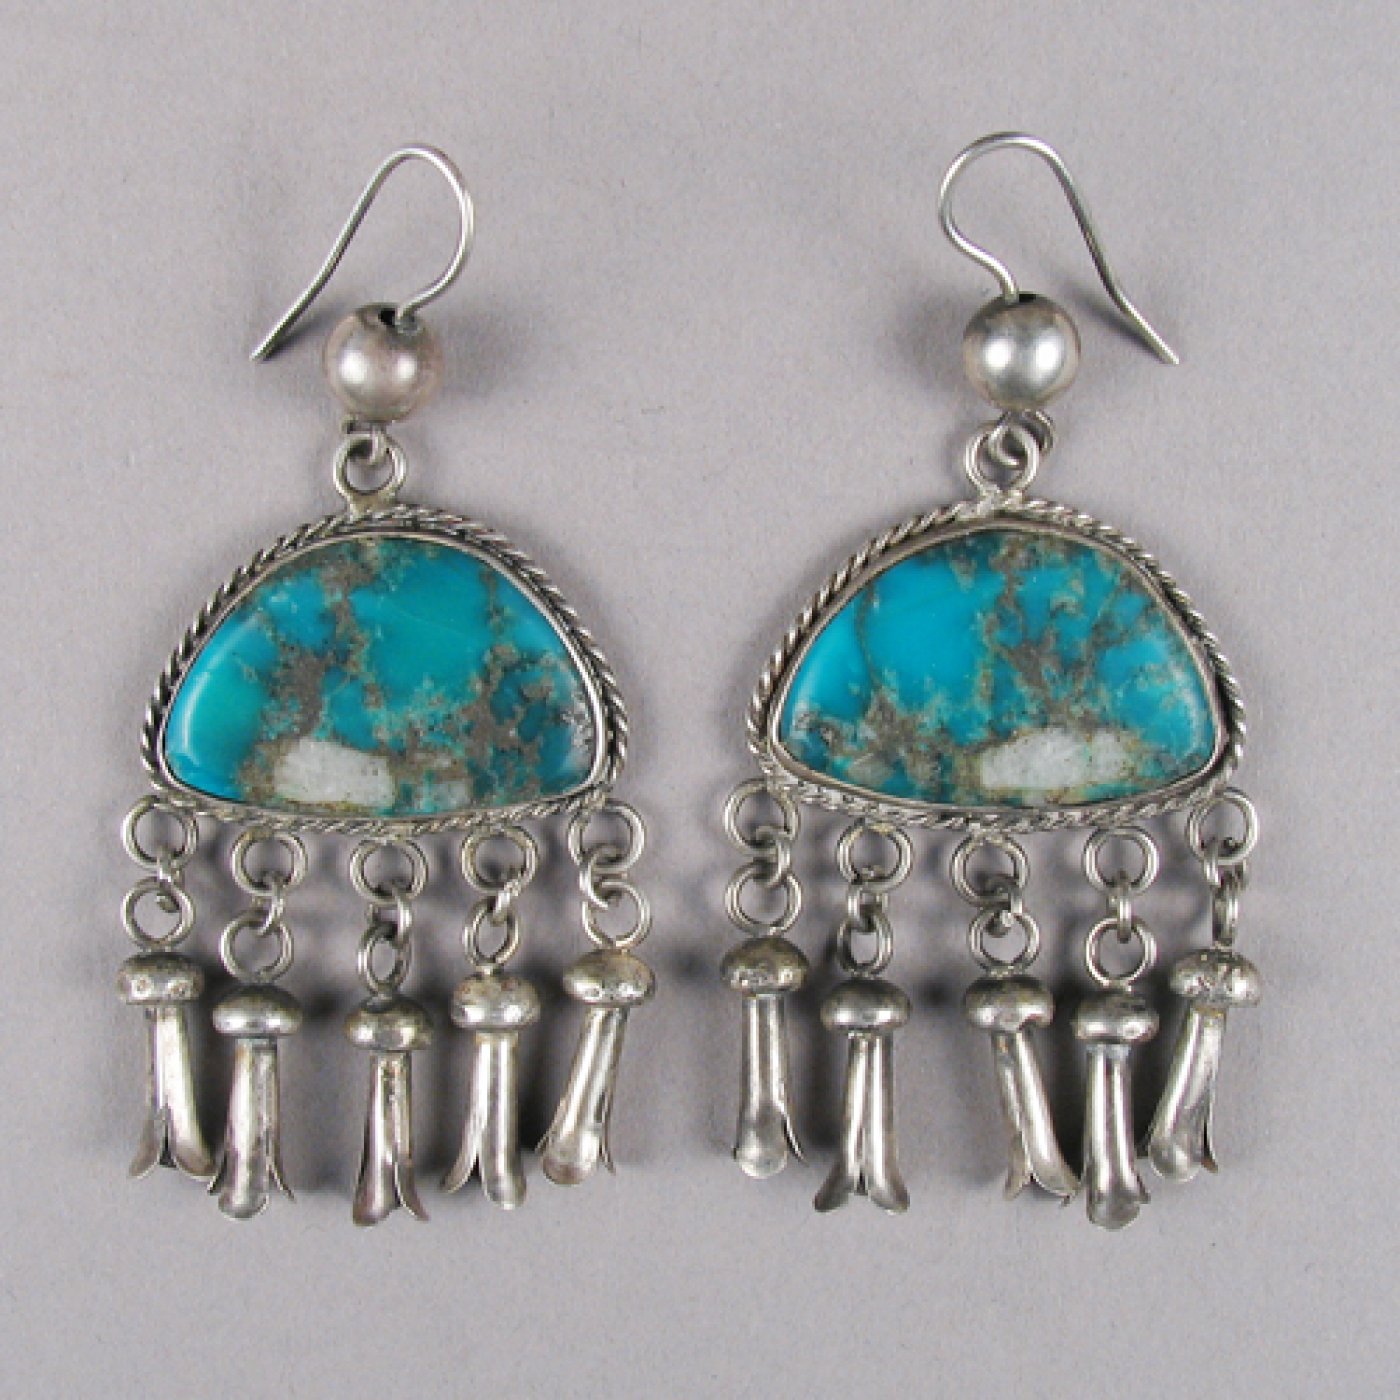 Silver Earrings with Turquoise Cloud | Shiprock Santa Fe